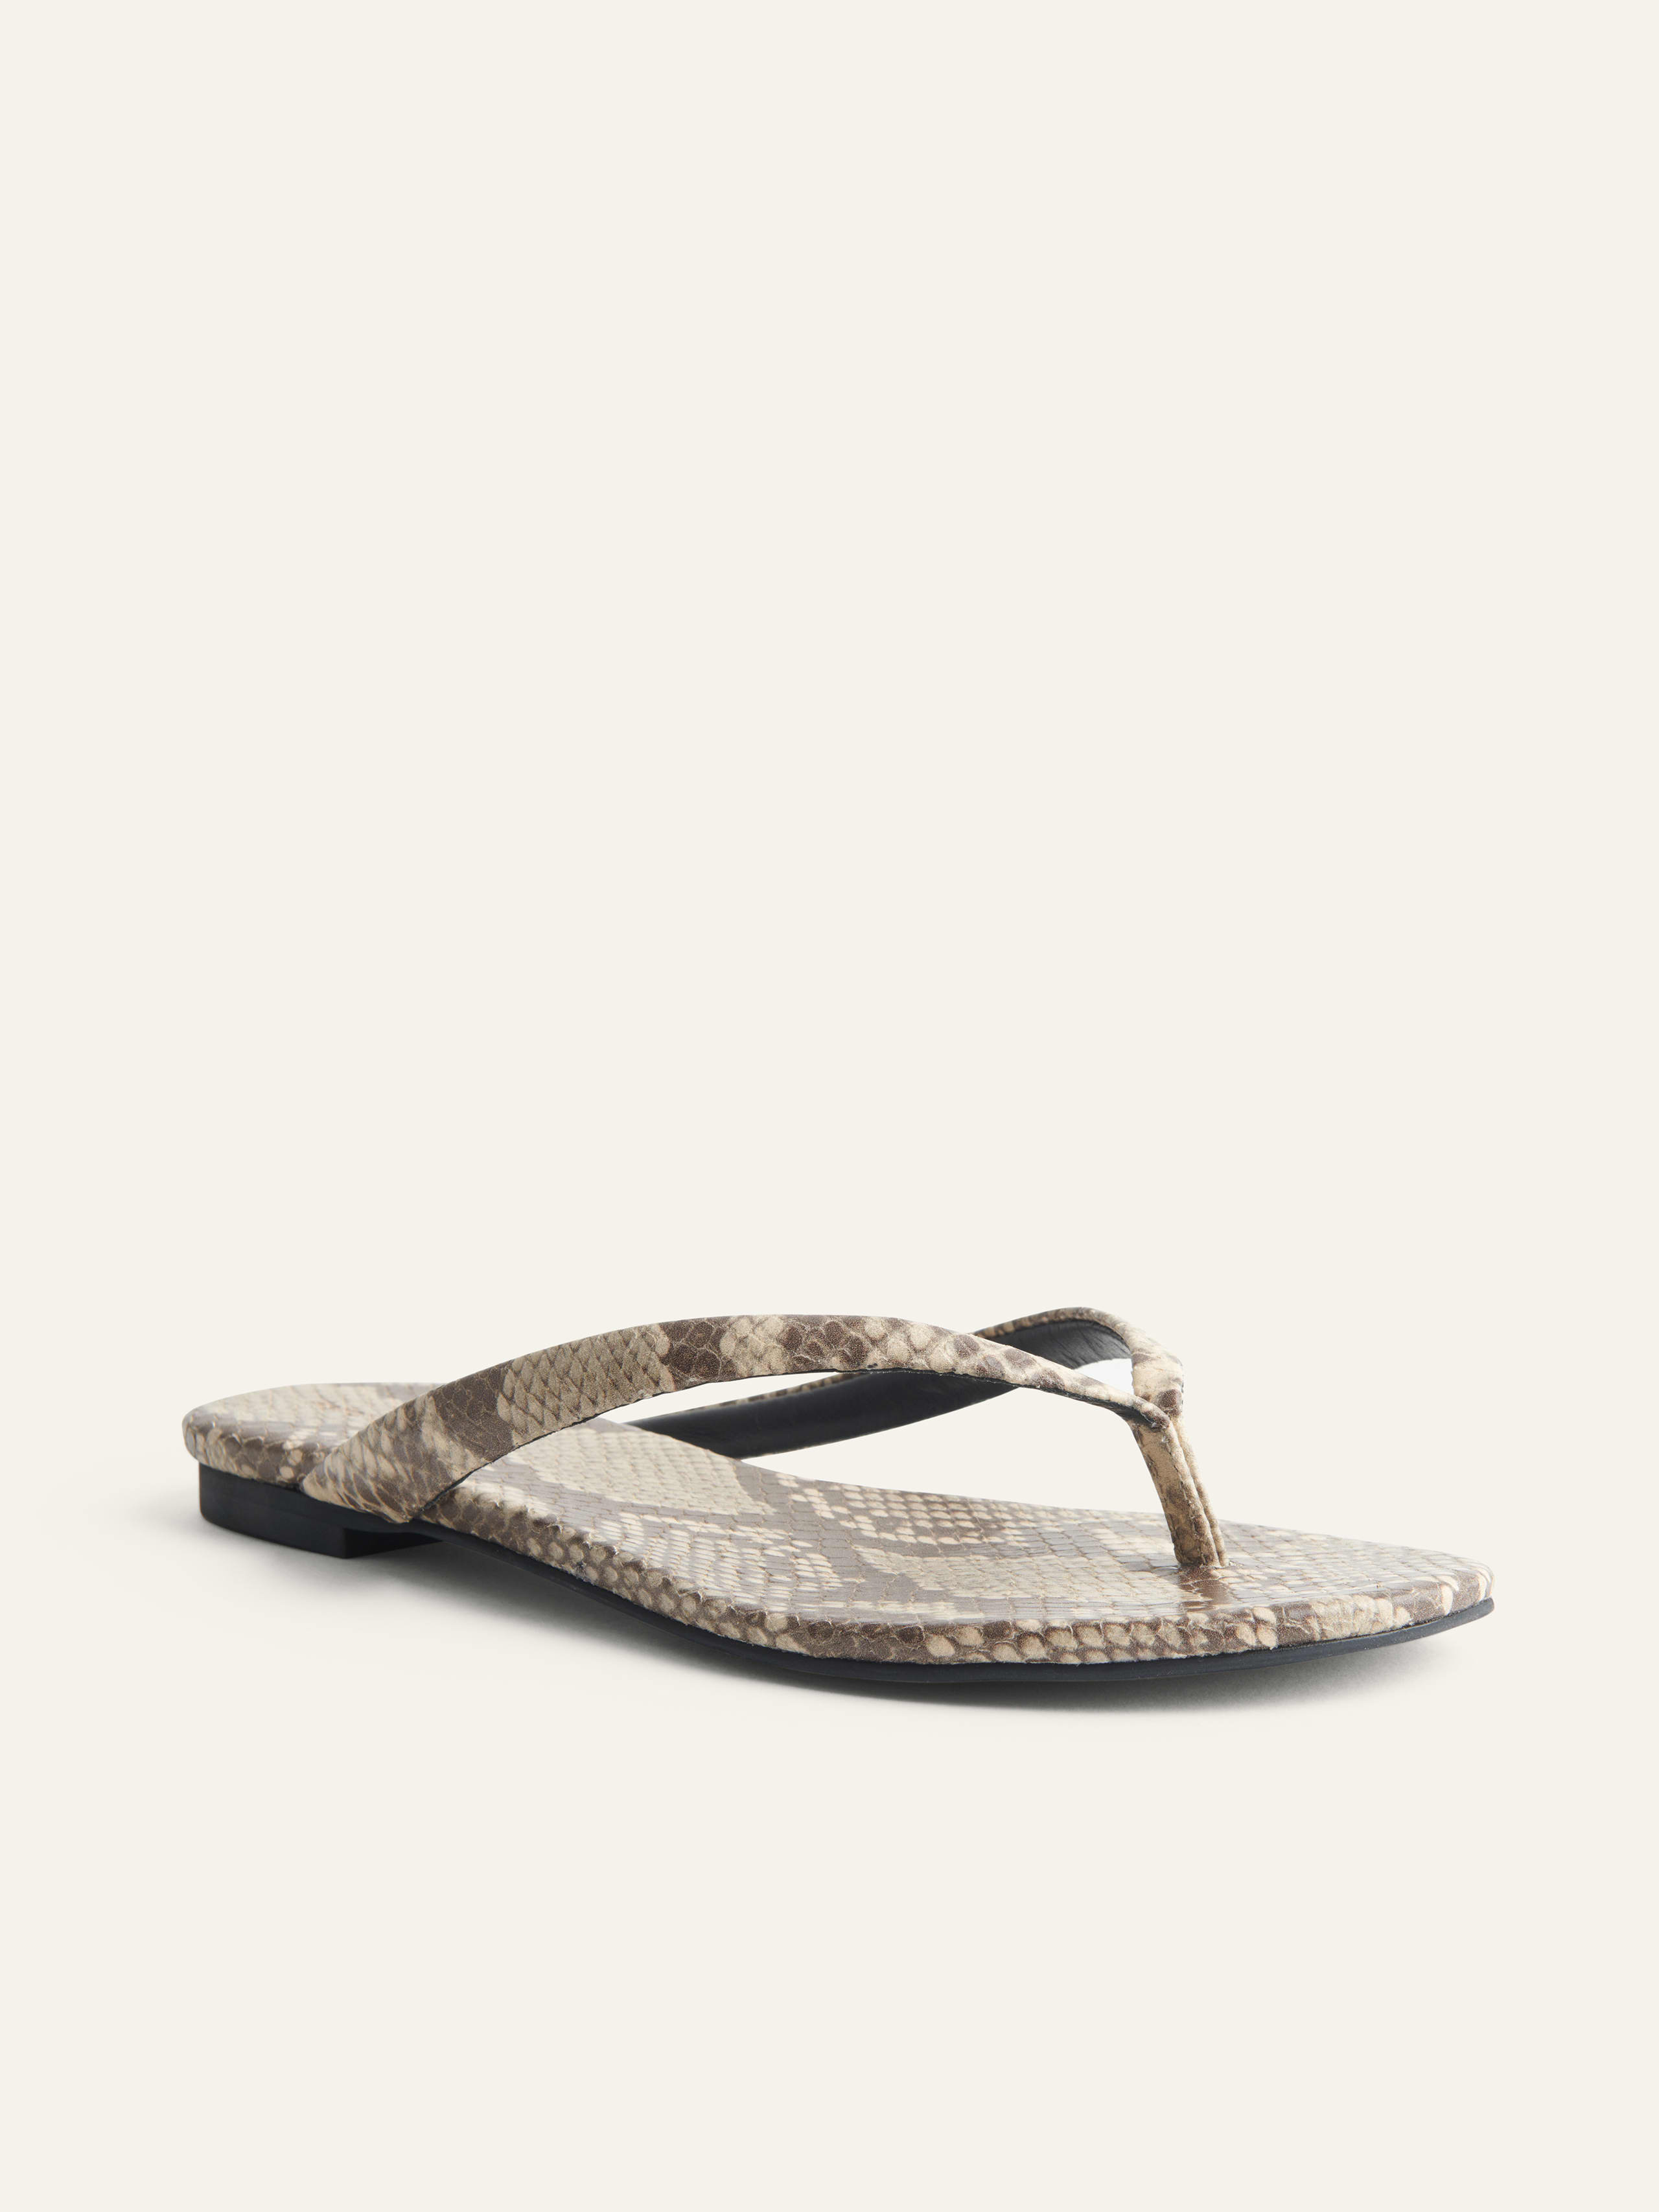 Blossom Thong Flat Sandal - Leather Sustainable Shoes | Reformation